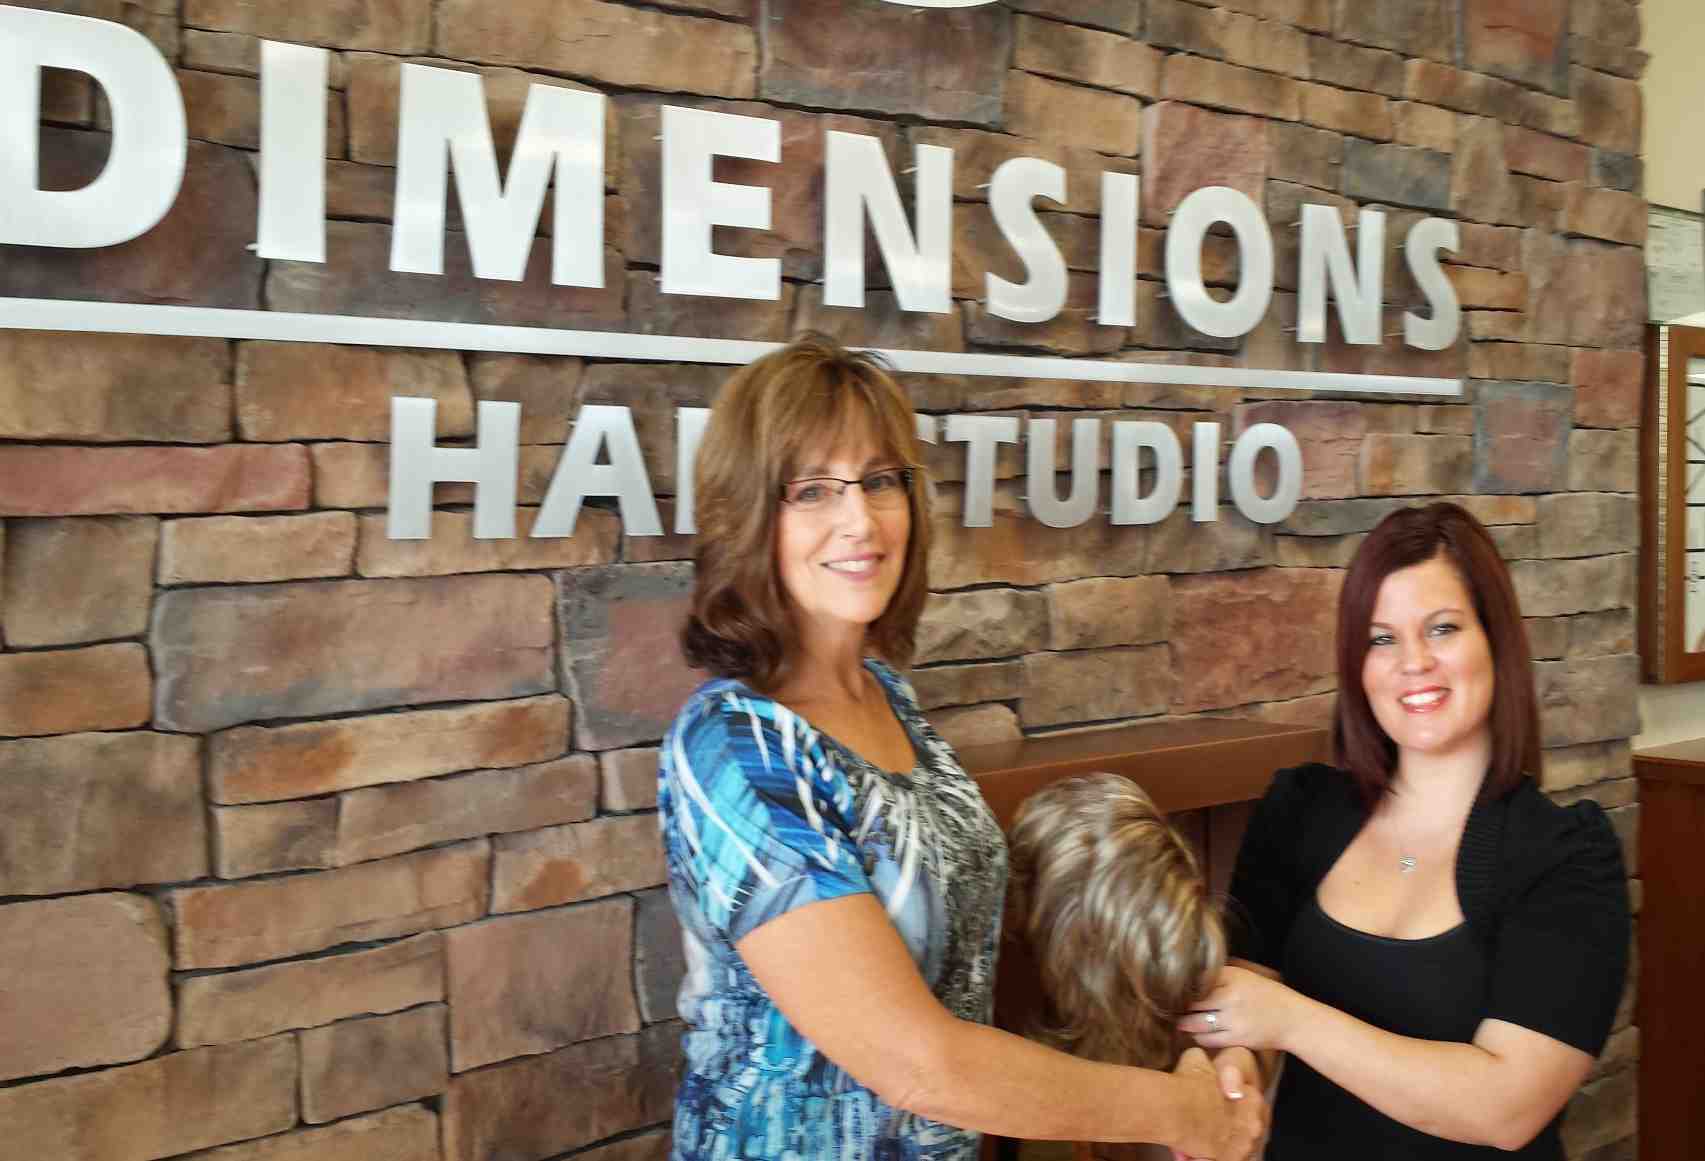 villages hair salons to trim and style wigs for cancer